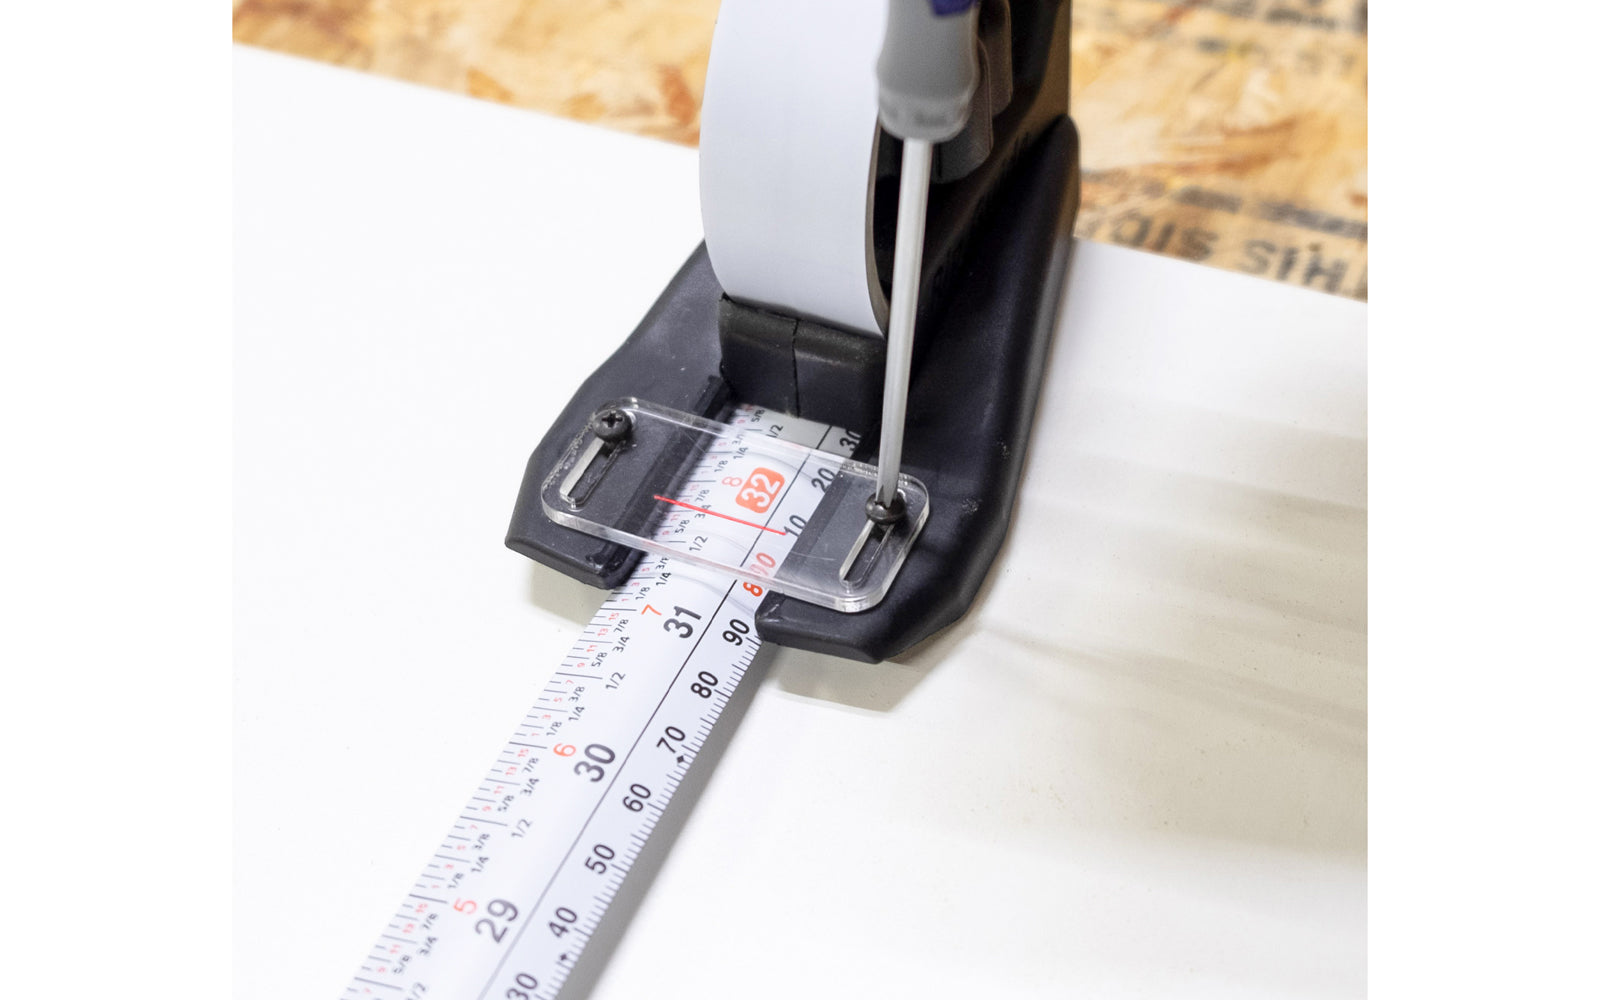 FastCap Rip Guide has a compact design that helps make quick, accurate, & repeatable measurements for your track saw. Simply slide the Rip Guide into the fence’s “T-track,” measure your cut, & saw away. For initial set up dial sight glass to your specific fence. 2 pack. Metric / Standard tape measure. 663807030498